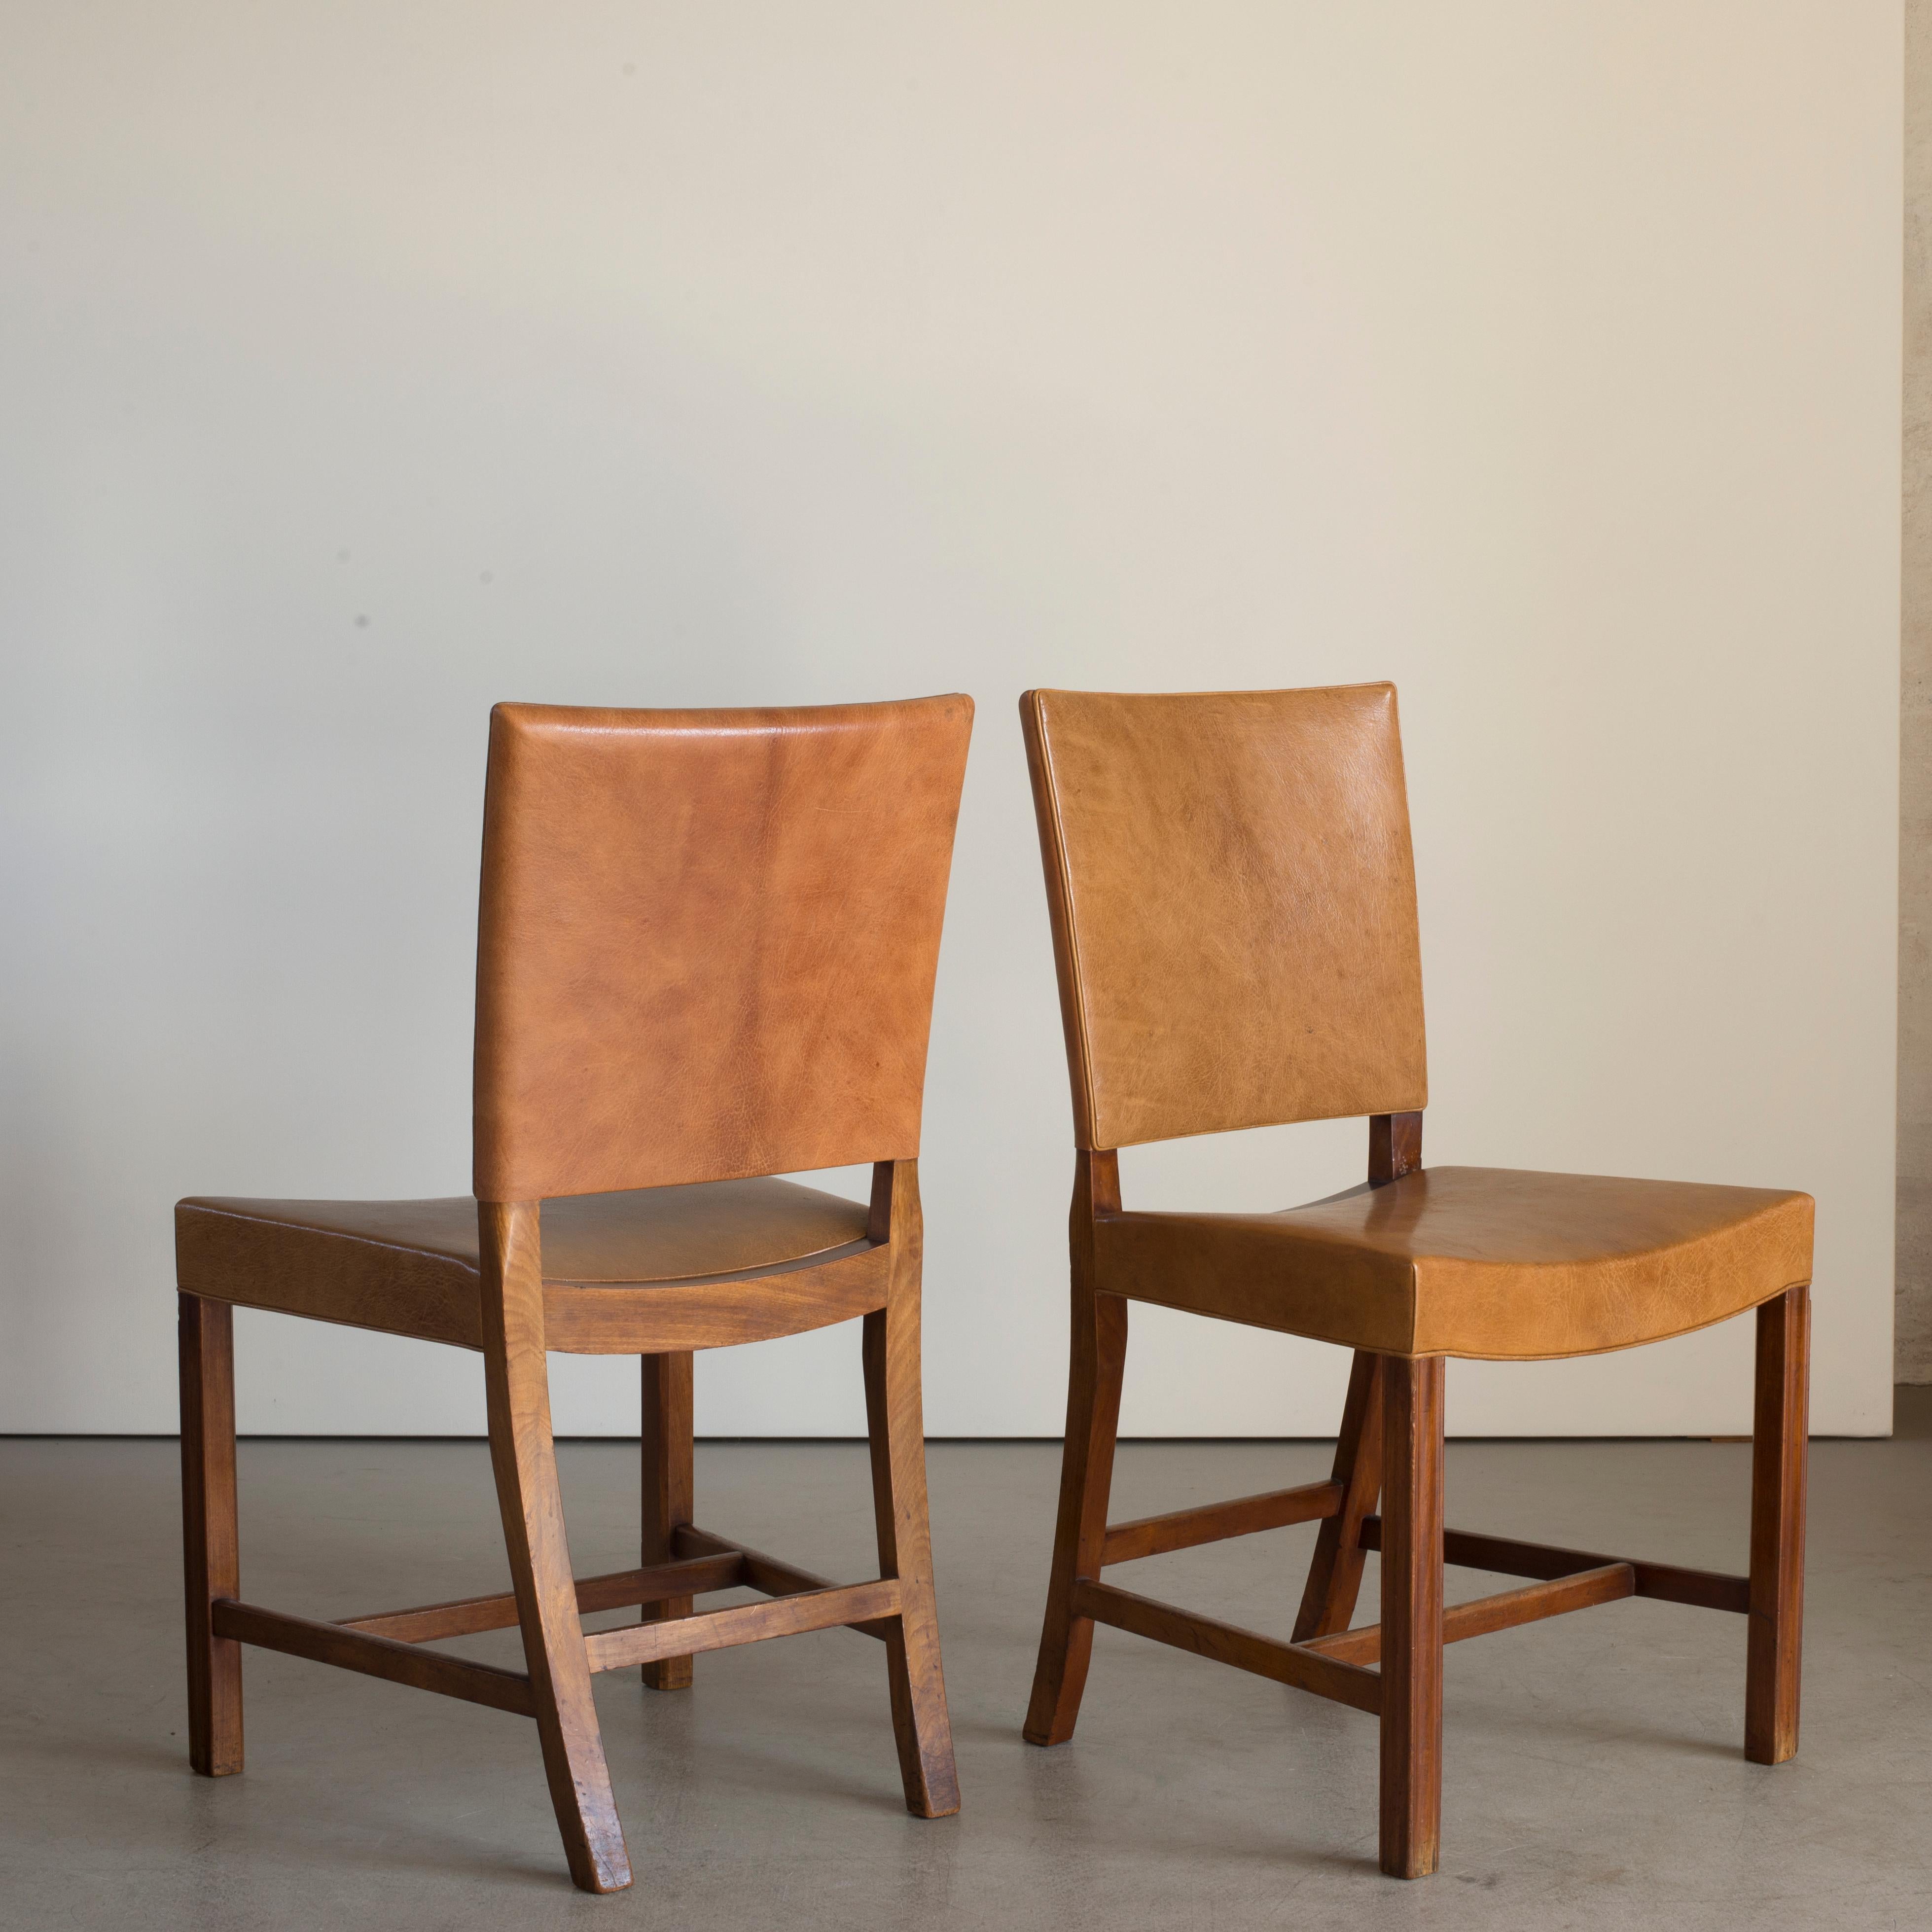 Leather Kaare Klint Set of Six Red Chairs for Rud. Rasmussen